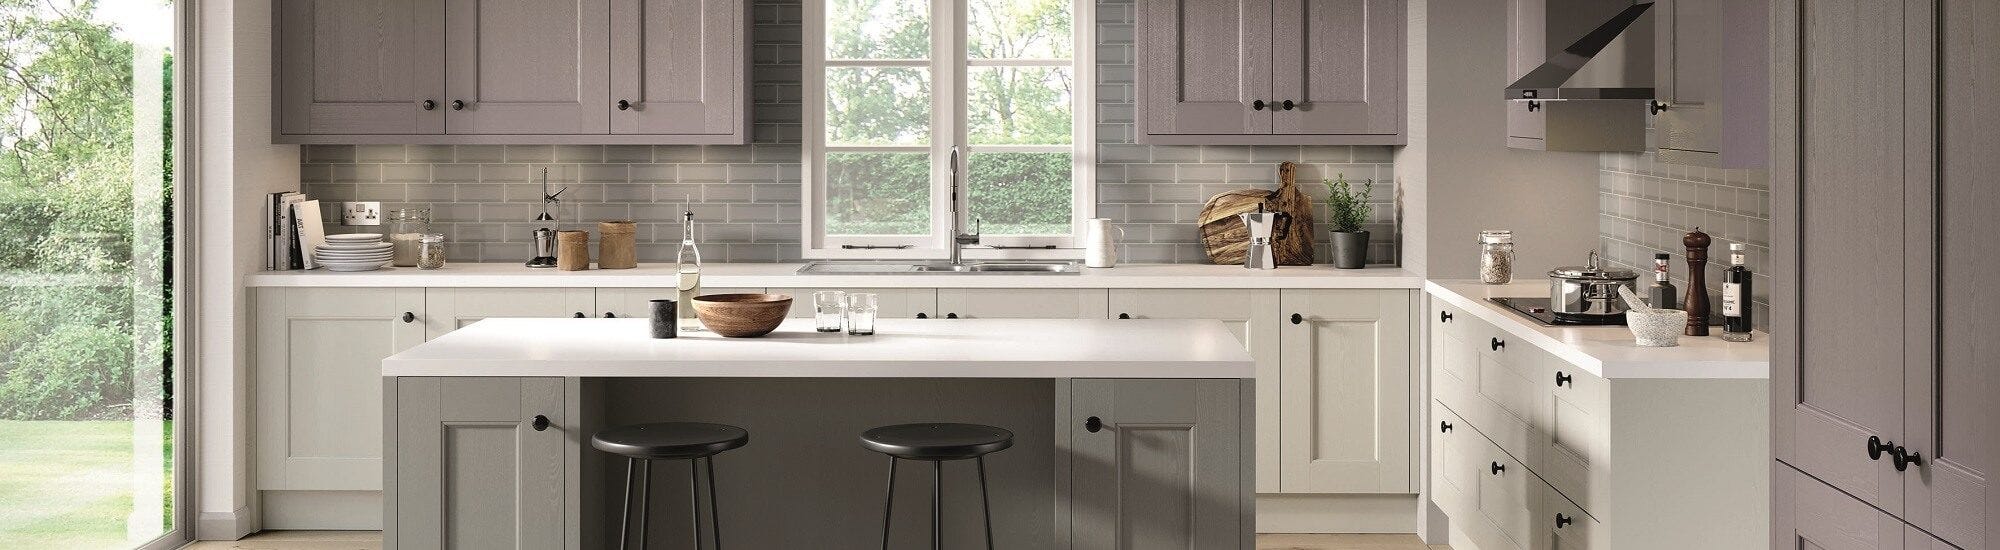 Shaker manor house kitchen in white and grey colour scheme 